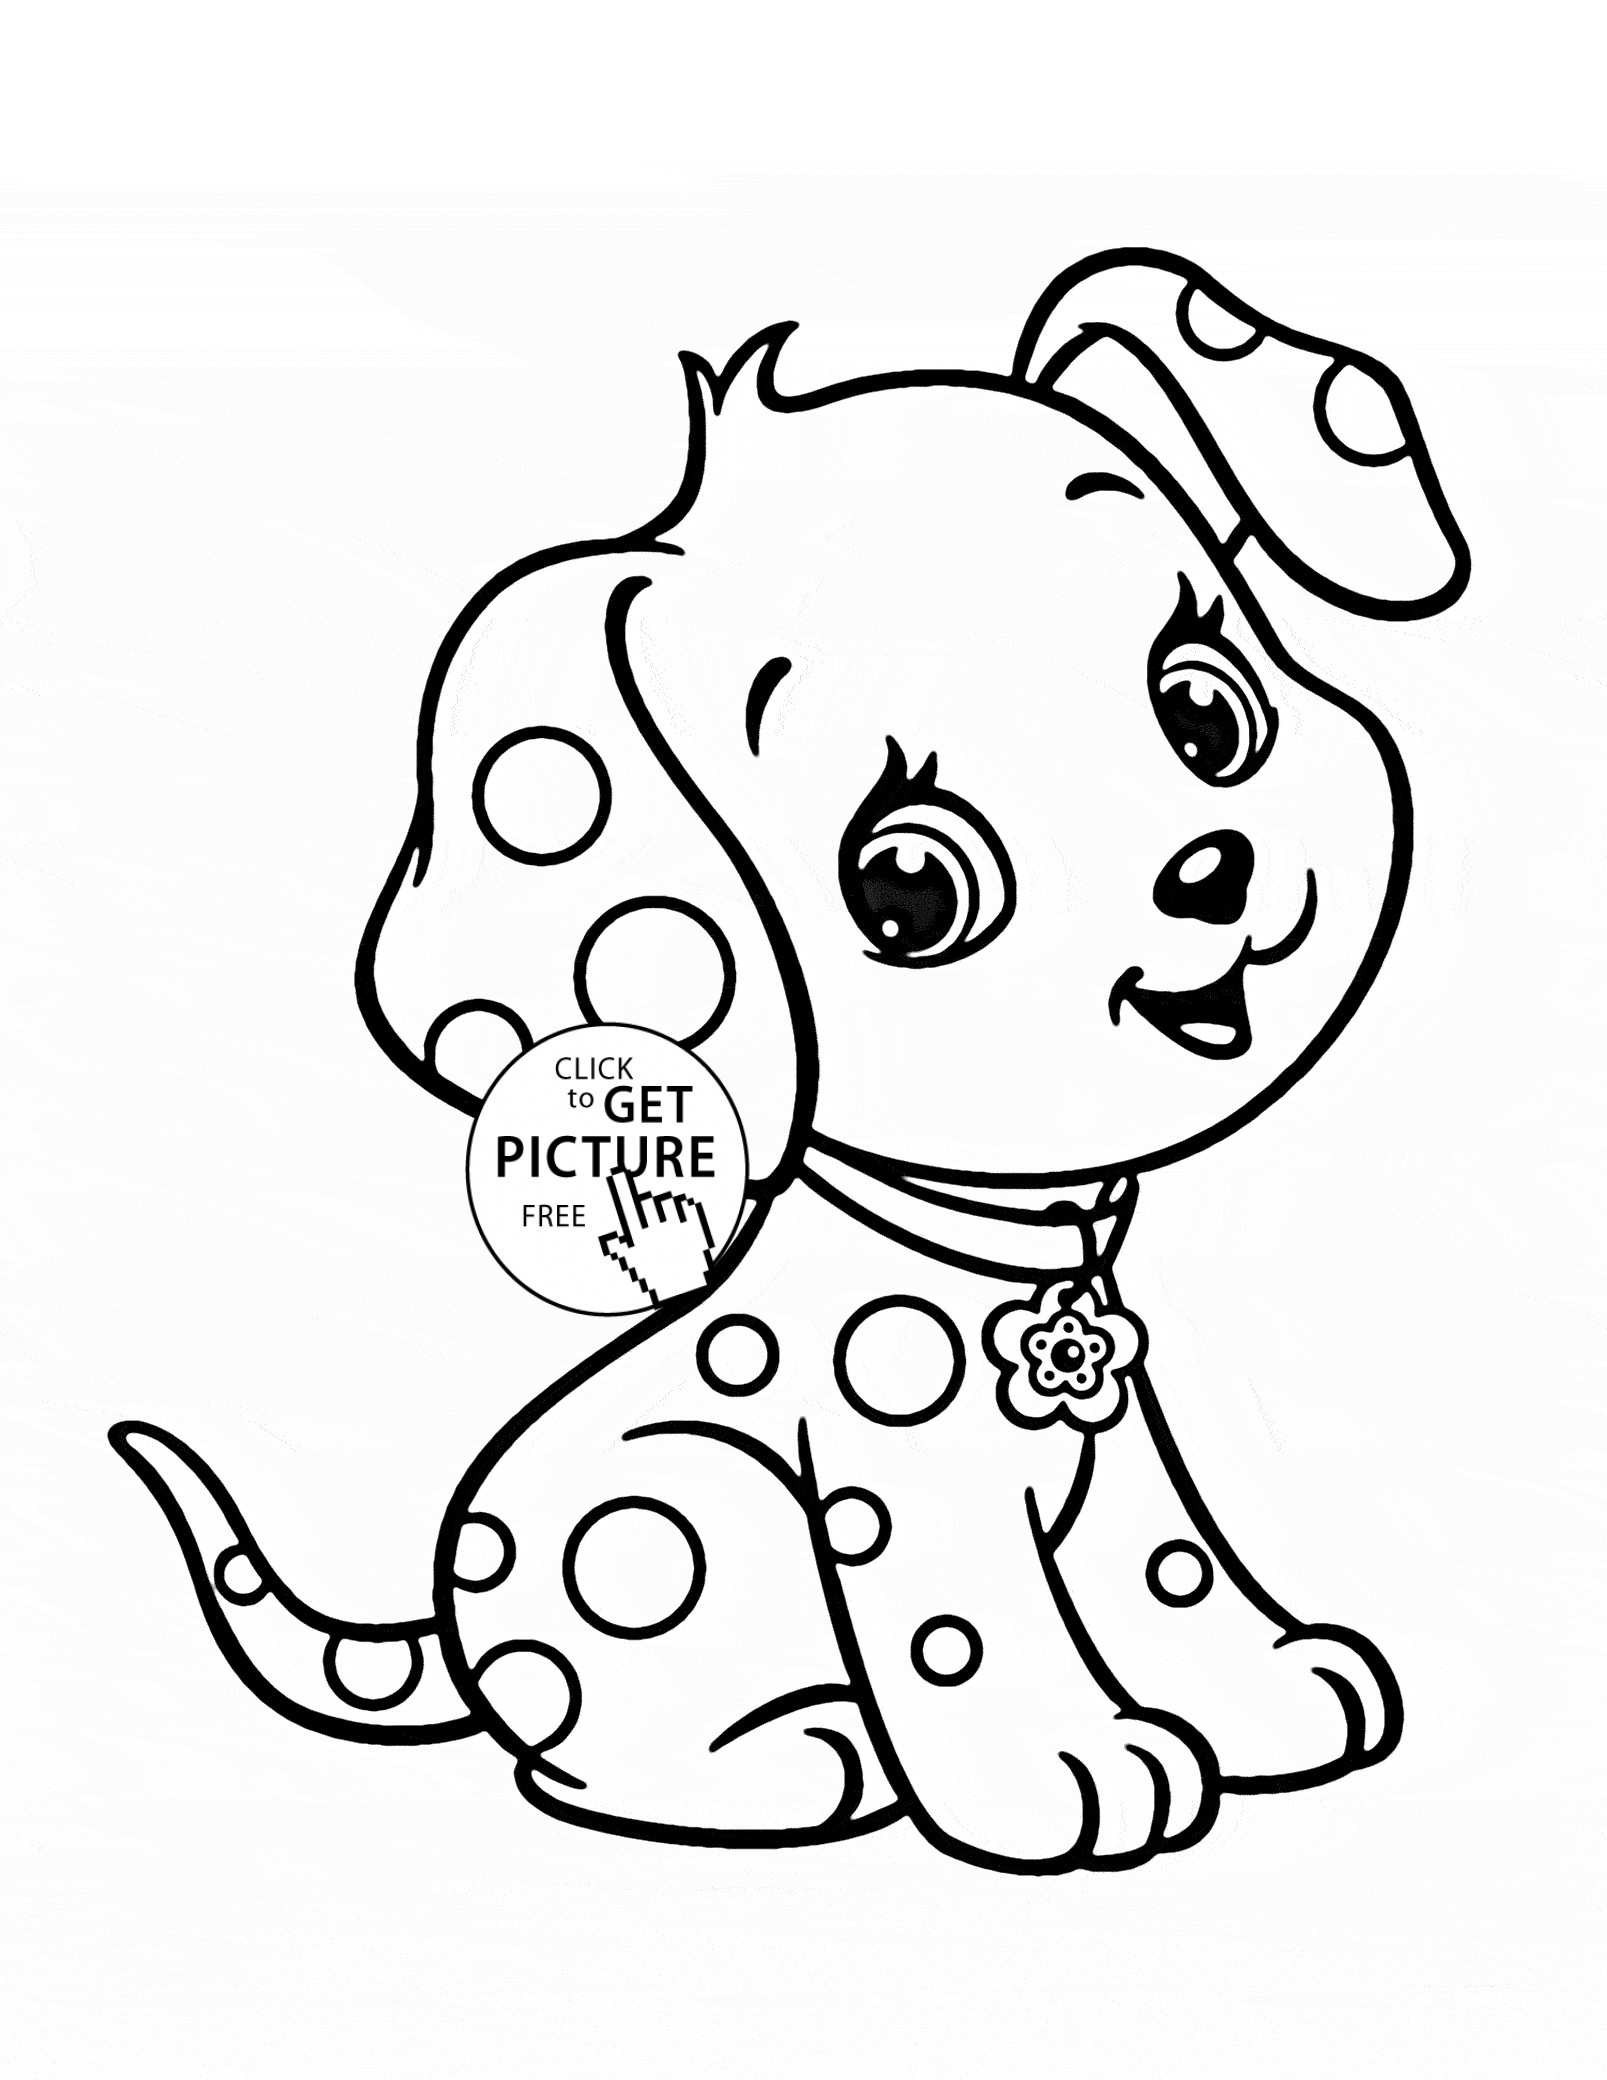 1607x2080 Beanie Boo Coloring Pages New Beanie Boo Coloring Pages Best Coloring Pages  Puppies to Print